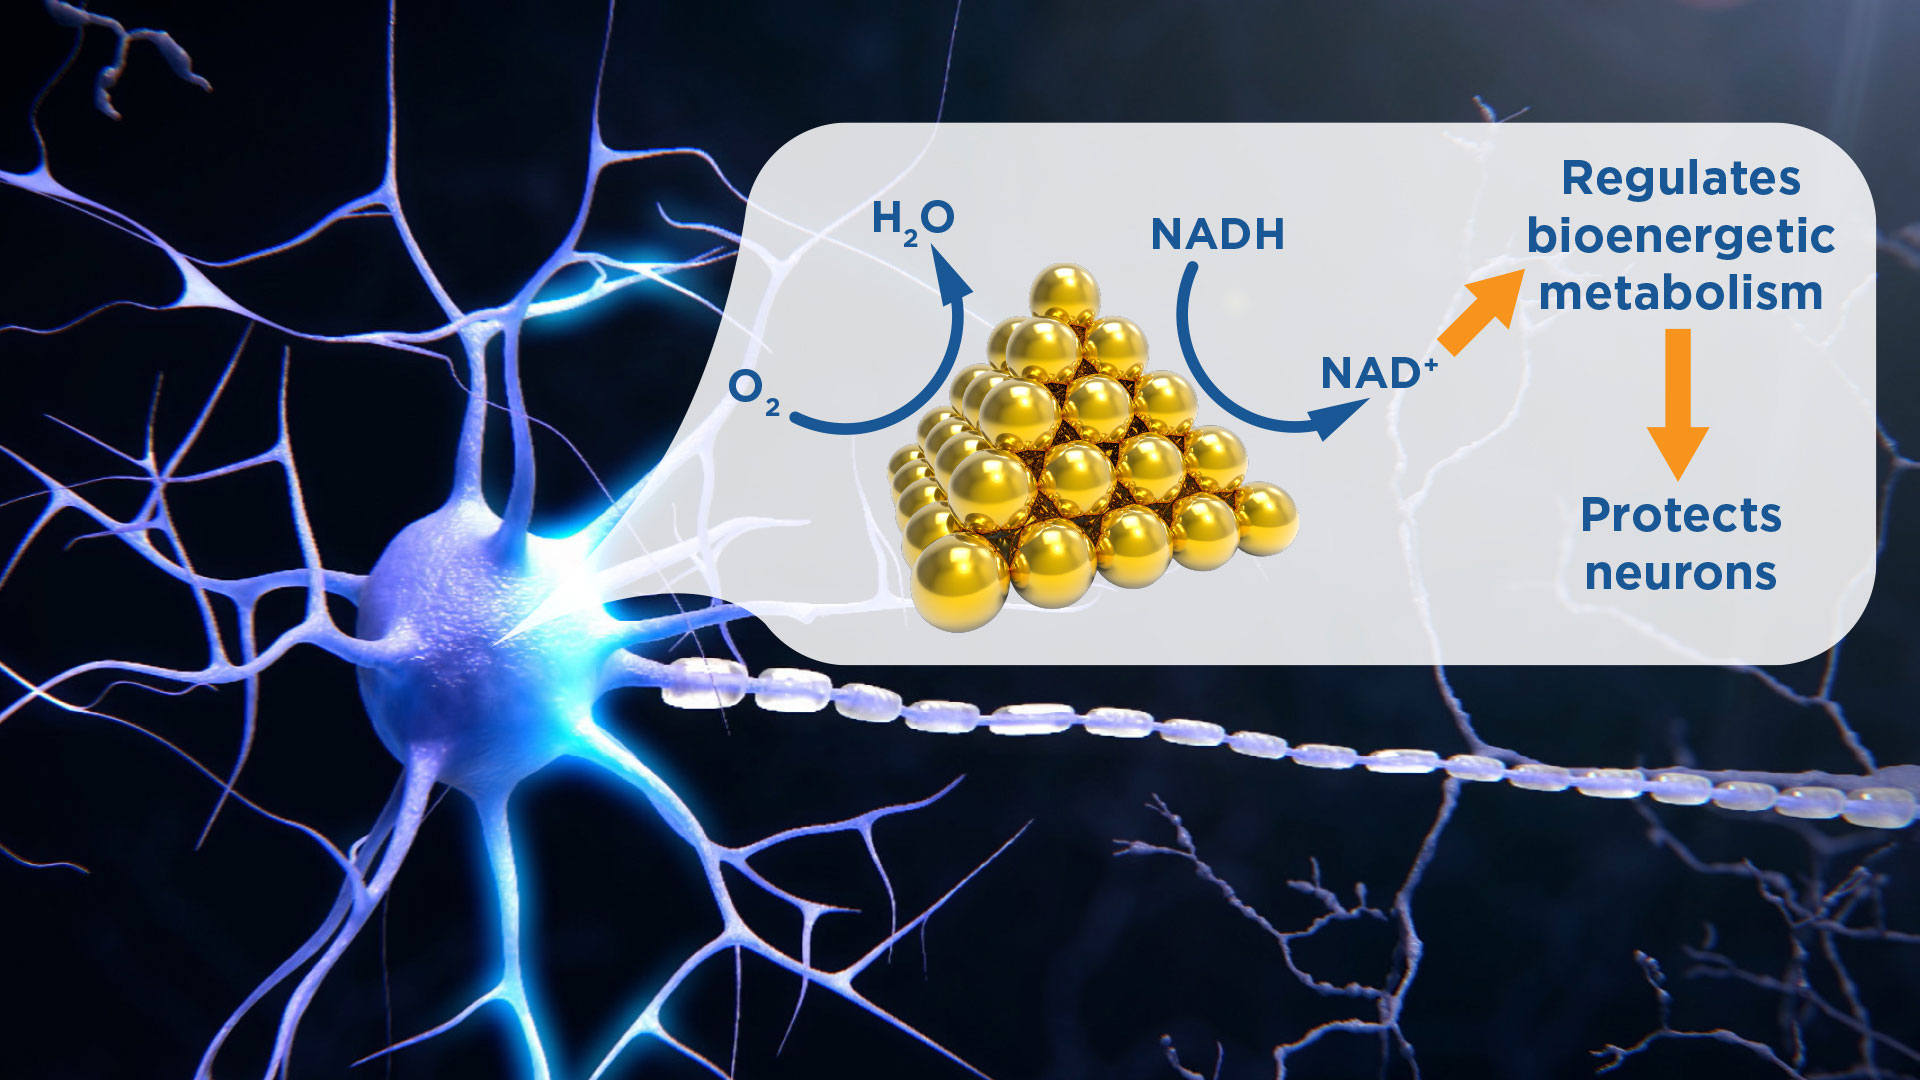  A diagram showing a pyramid-shaped stack of gold-colored spheres representing a nanocrystal with a neuron cell in the background. It shows how the crystal converts NADH to NAD+ which regulates bioenergetic metabolism and protects nuerons.